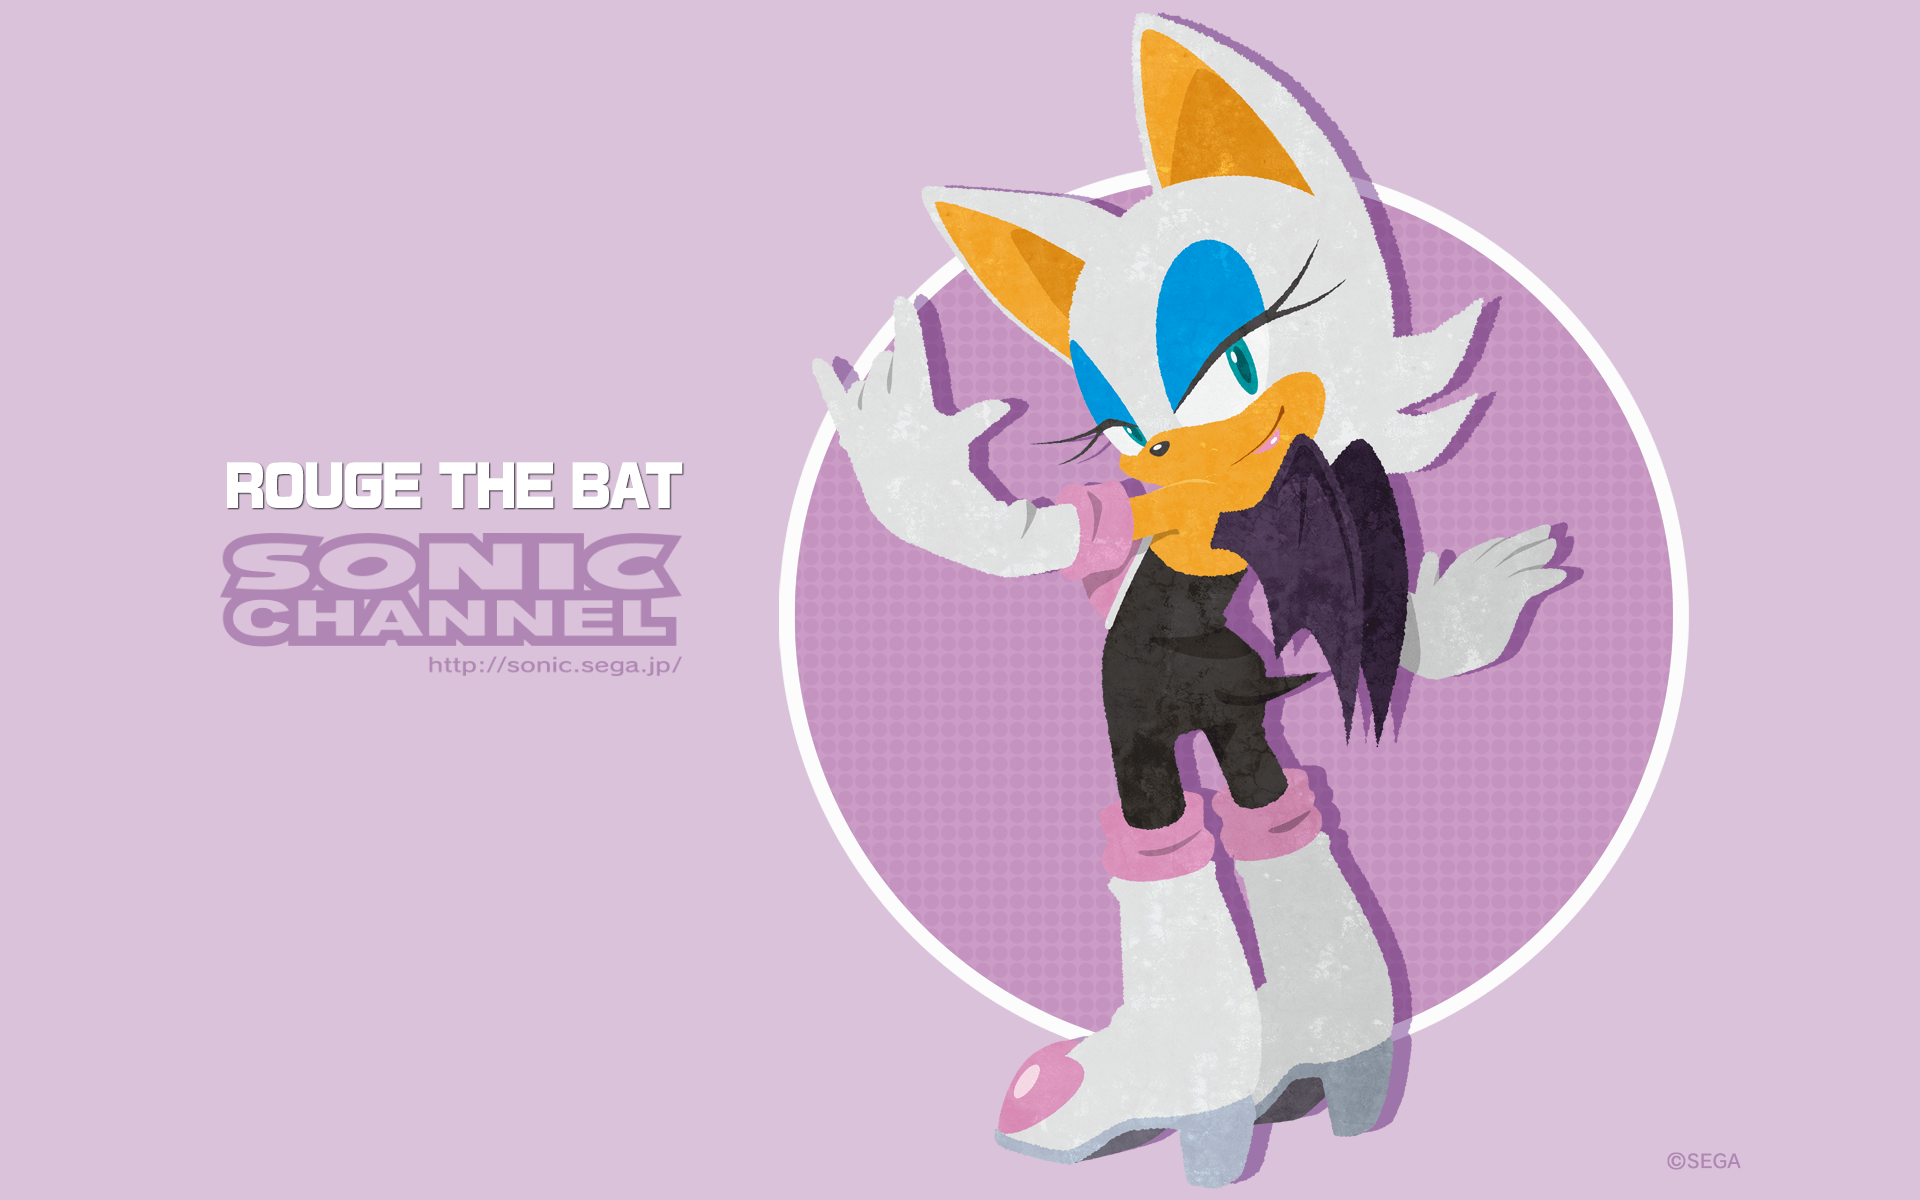 05 The Bat Channel